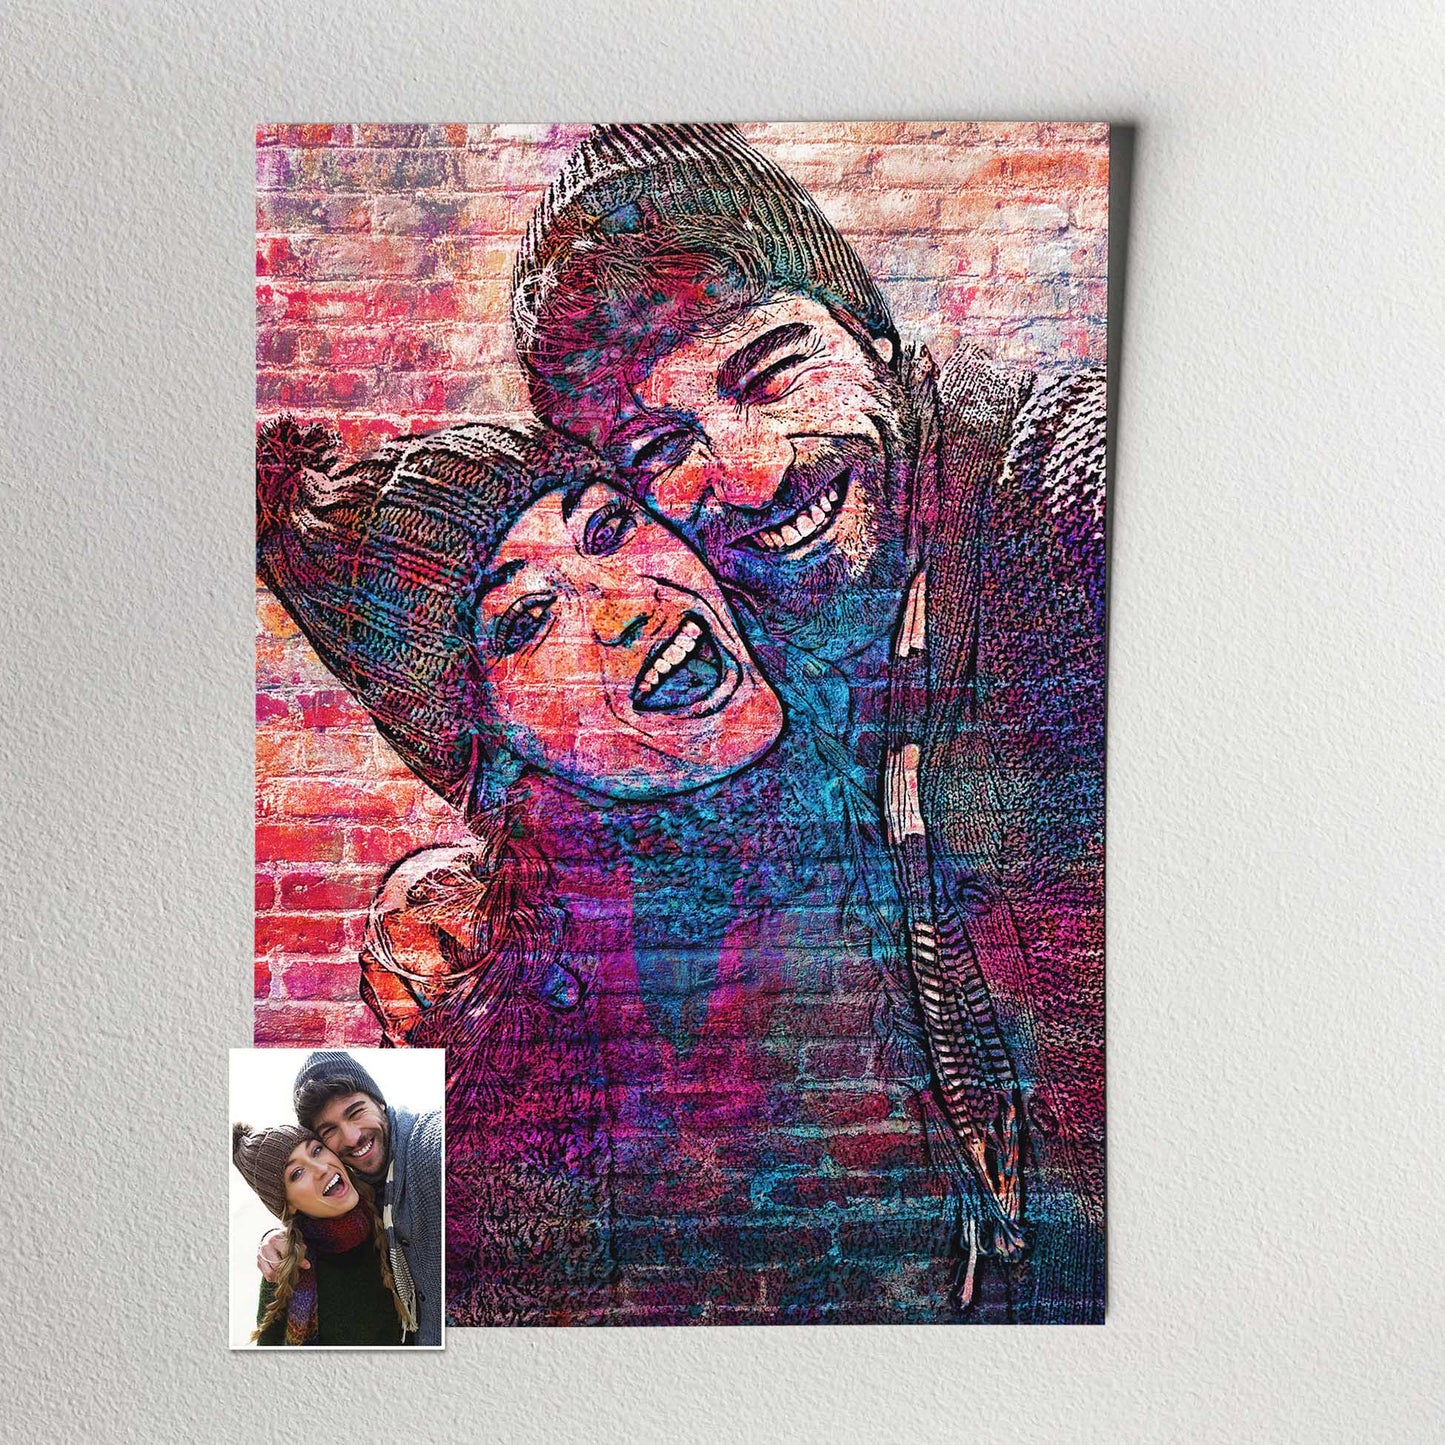 Immerse in Urban Art: Bring the dynamic energy of street art into your home or office with this personalised brick graffiti street art print. Its bold and daring style, coupled with the realistic filter effect